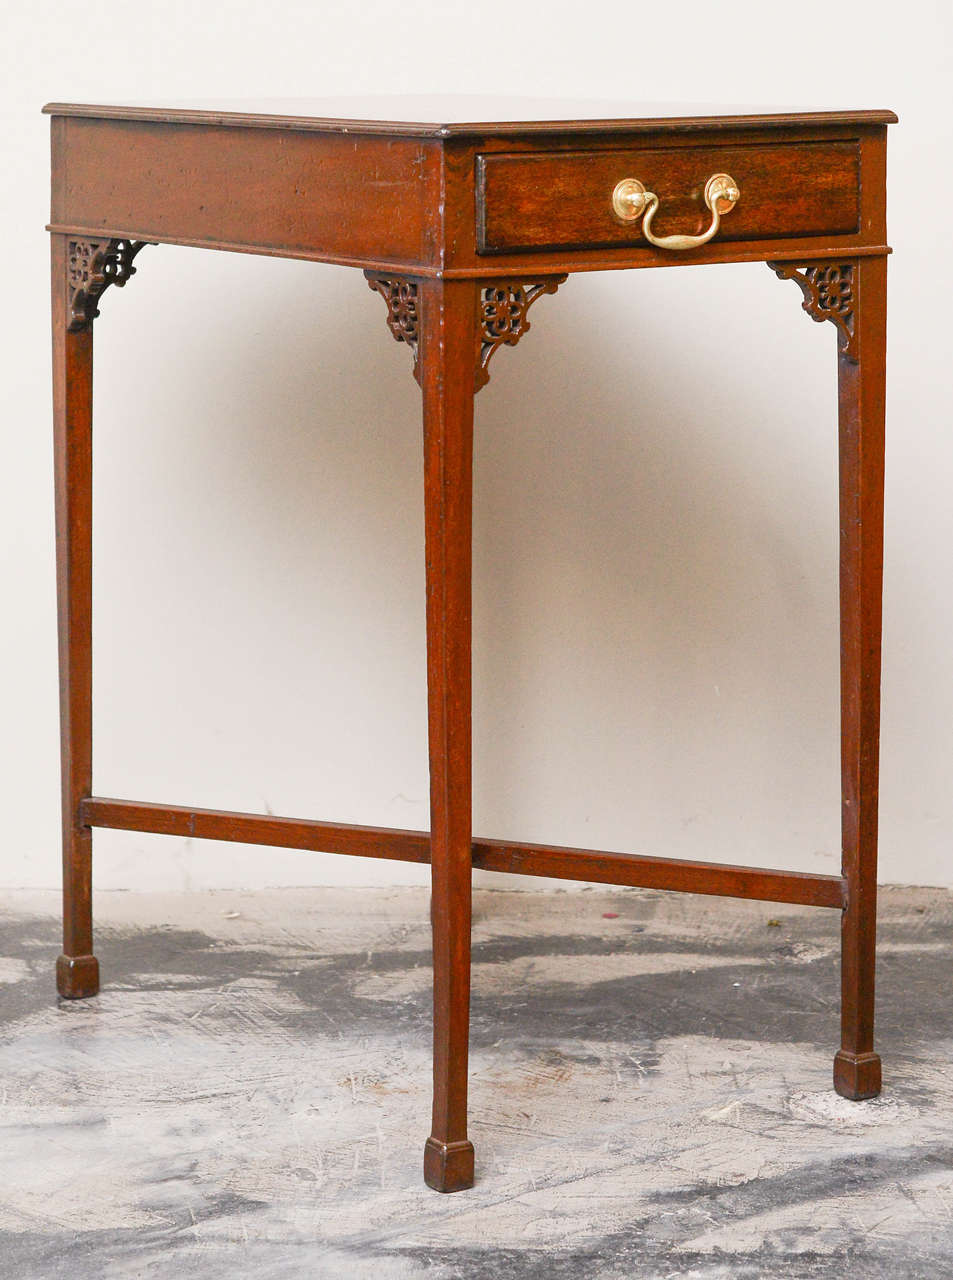 George III Style Mahogany Single Drawer Rectangular Side Table or Tea Table, Circa 1850; with quatrefoil and C-scroll carved fretwork decoration, X-from stretcher on molded block feet.